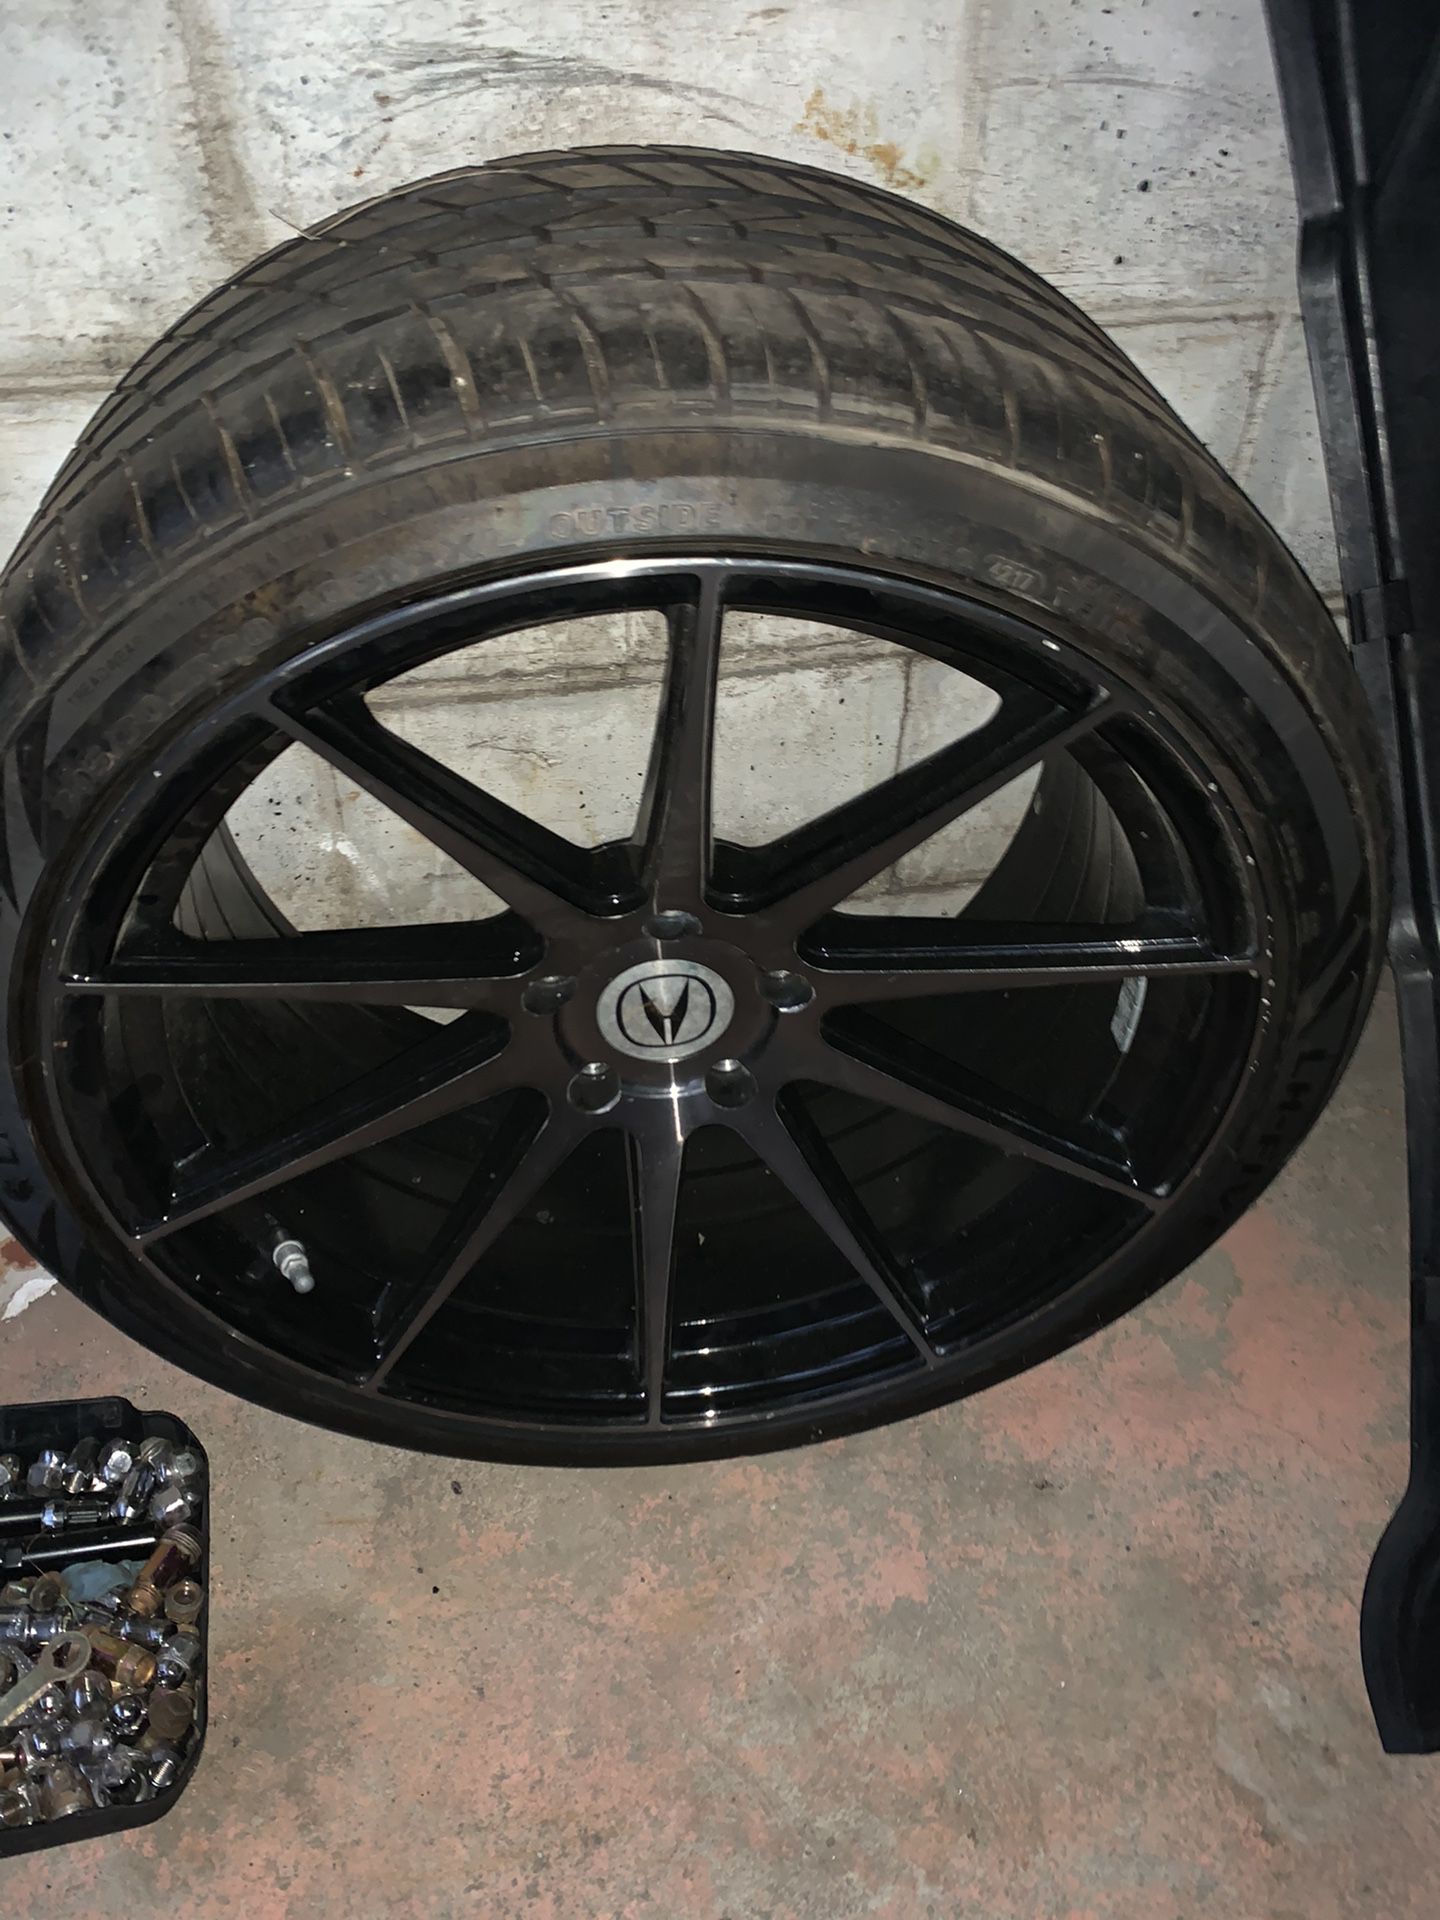 Vertini wheels with brand new tires